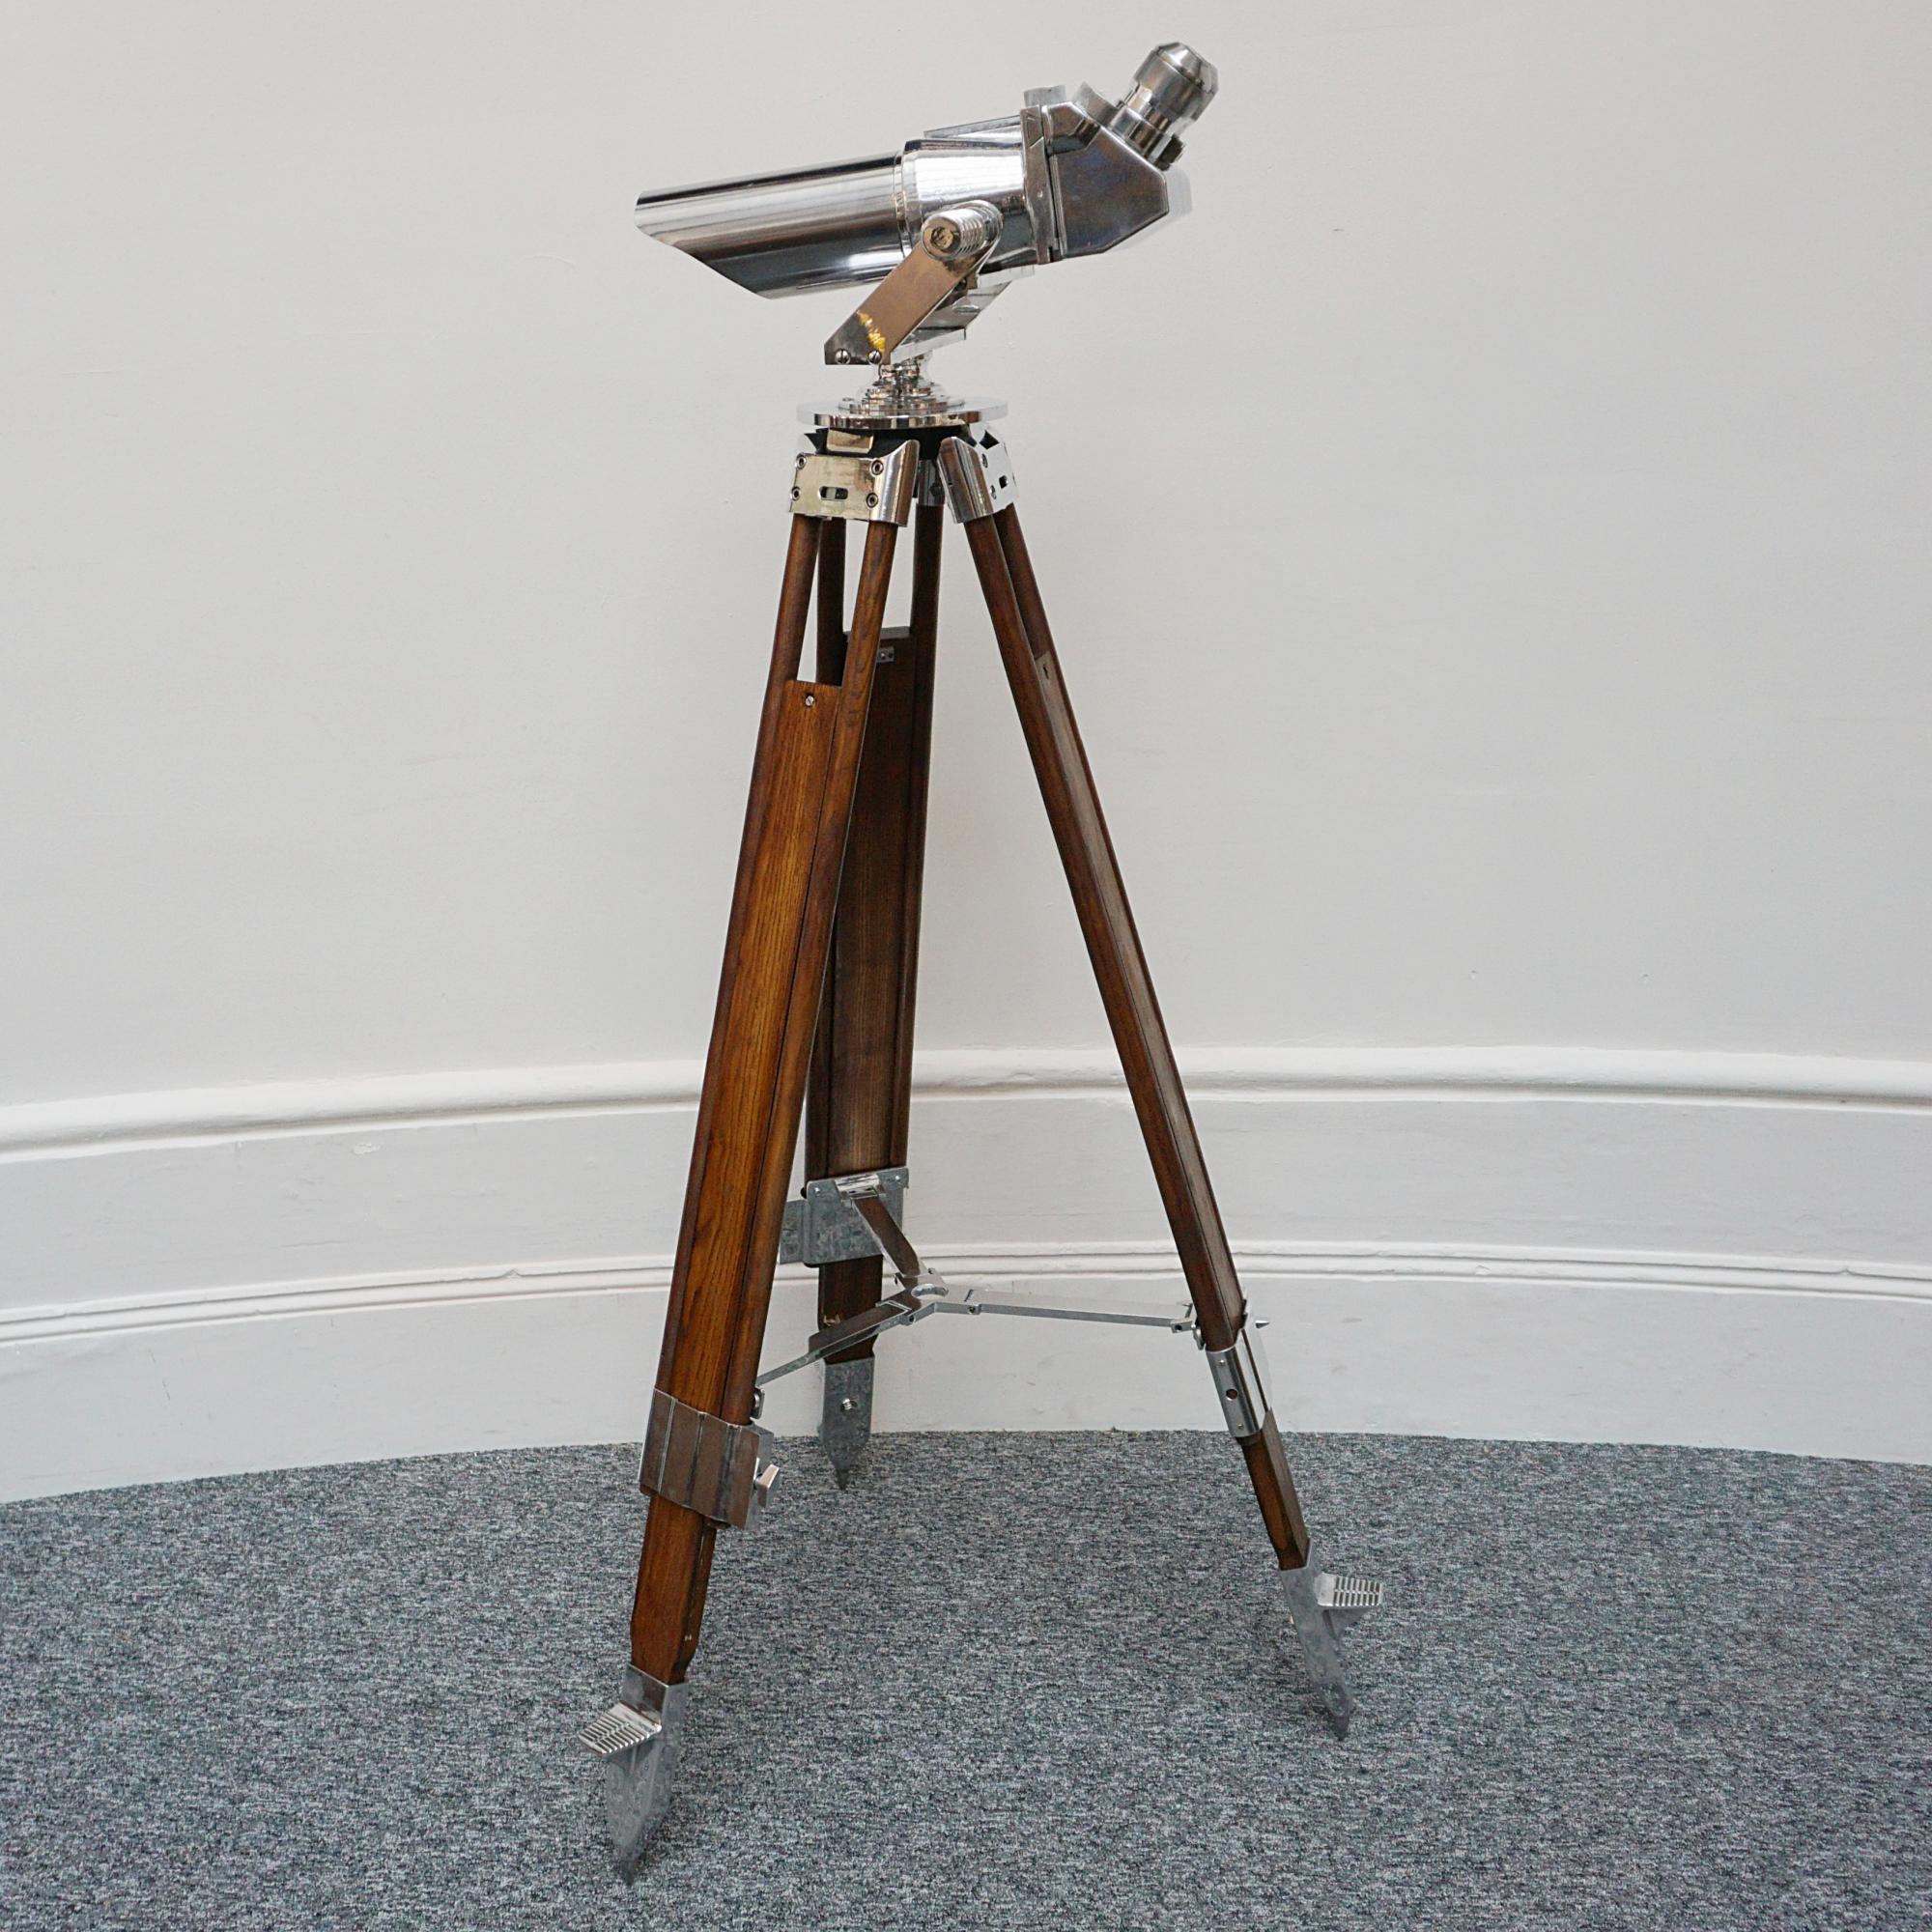 A pair of 10x80 observation binoculars designed by Emil Busch Optical Industries of Rathenow. WW11 naval binoculars with eyepieces set at 45 degrees. Set on a later extending wood and chromed metal stand, with chromed conical feet. This design was